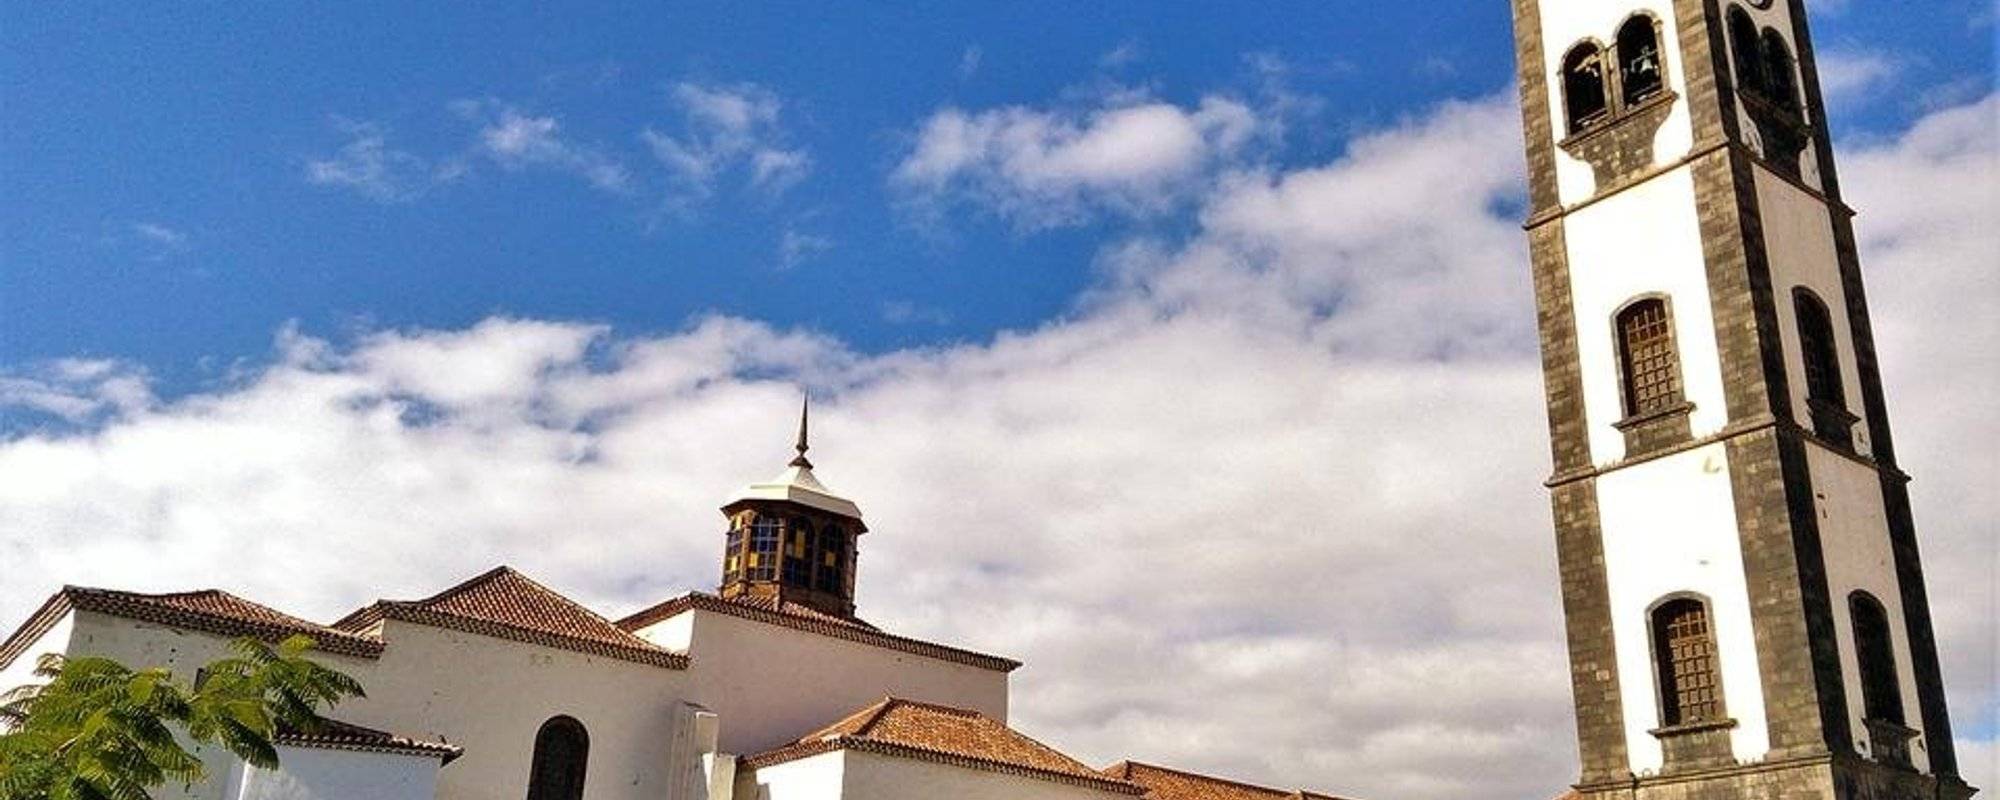 Beauties of Tenerife: picturesque churches and chapels from around the island